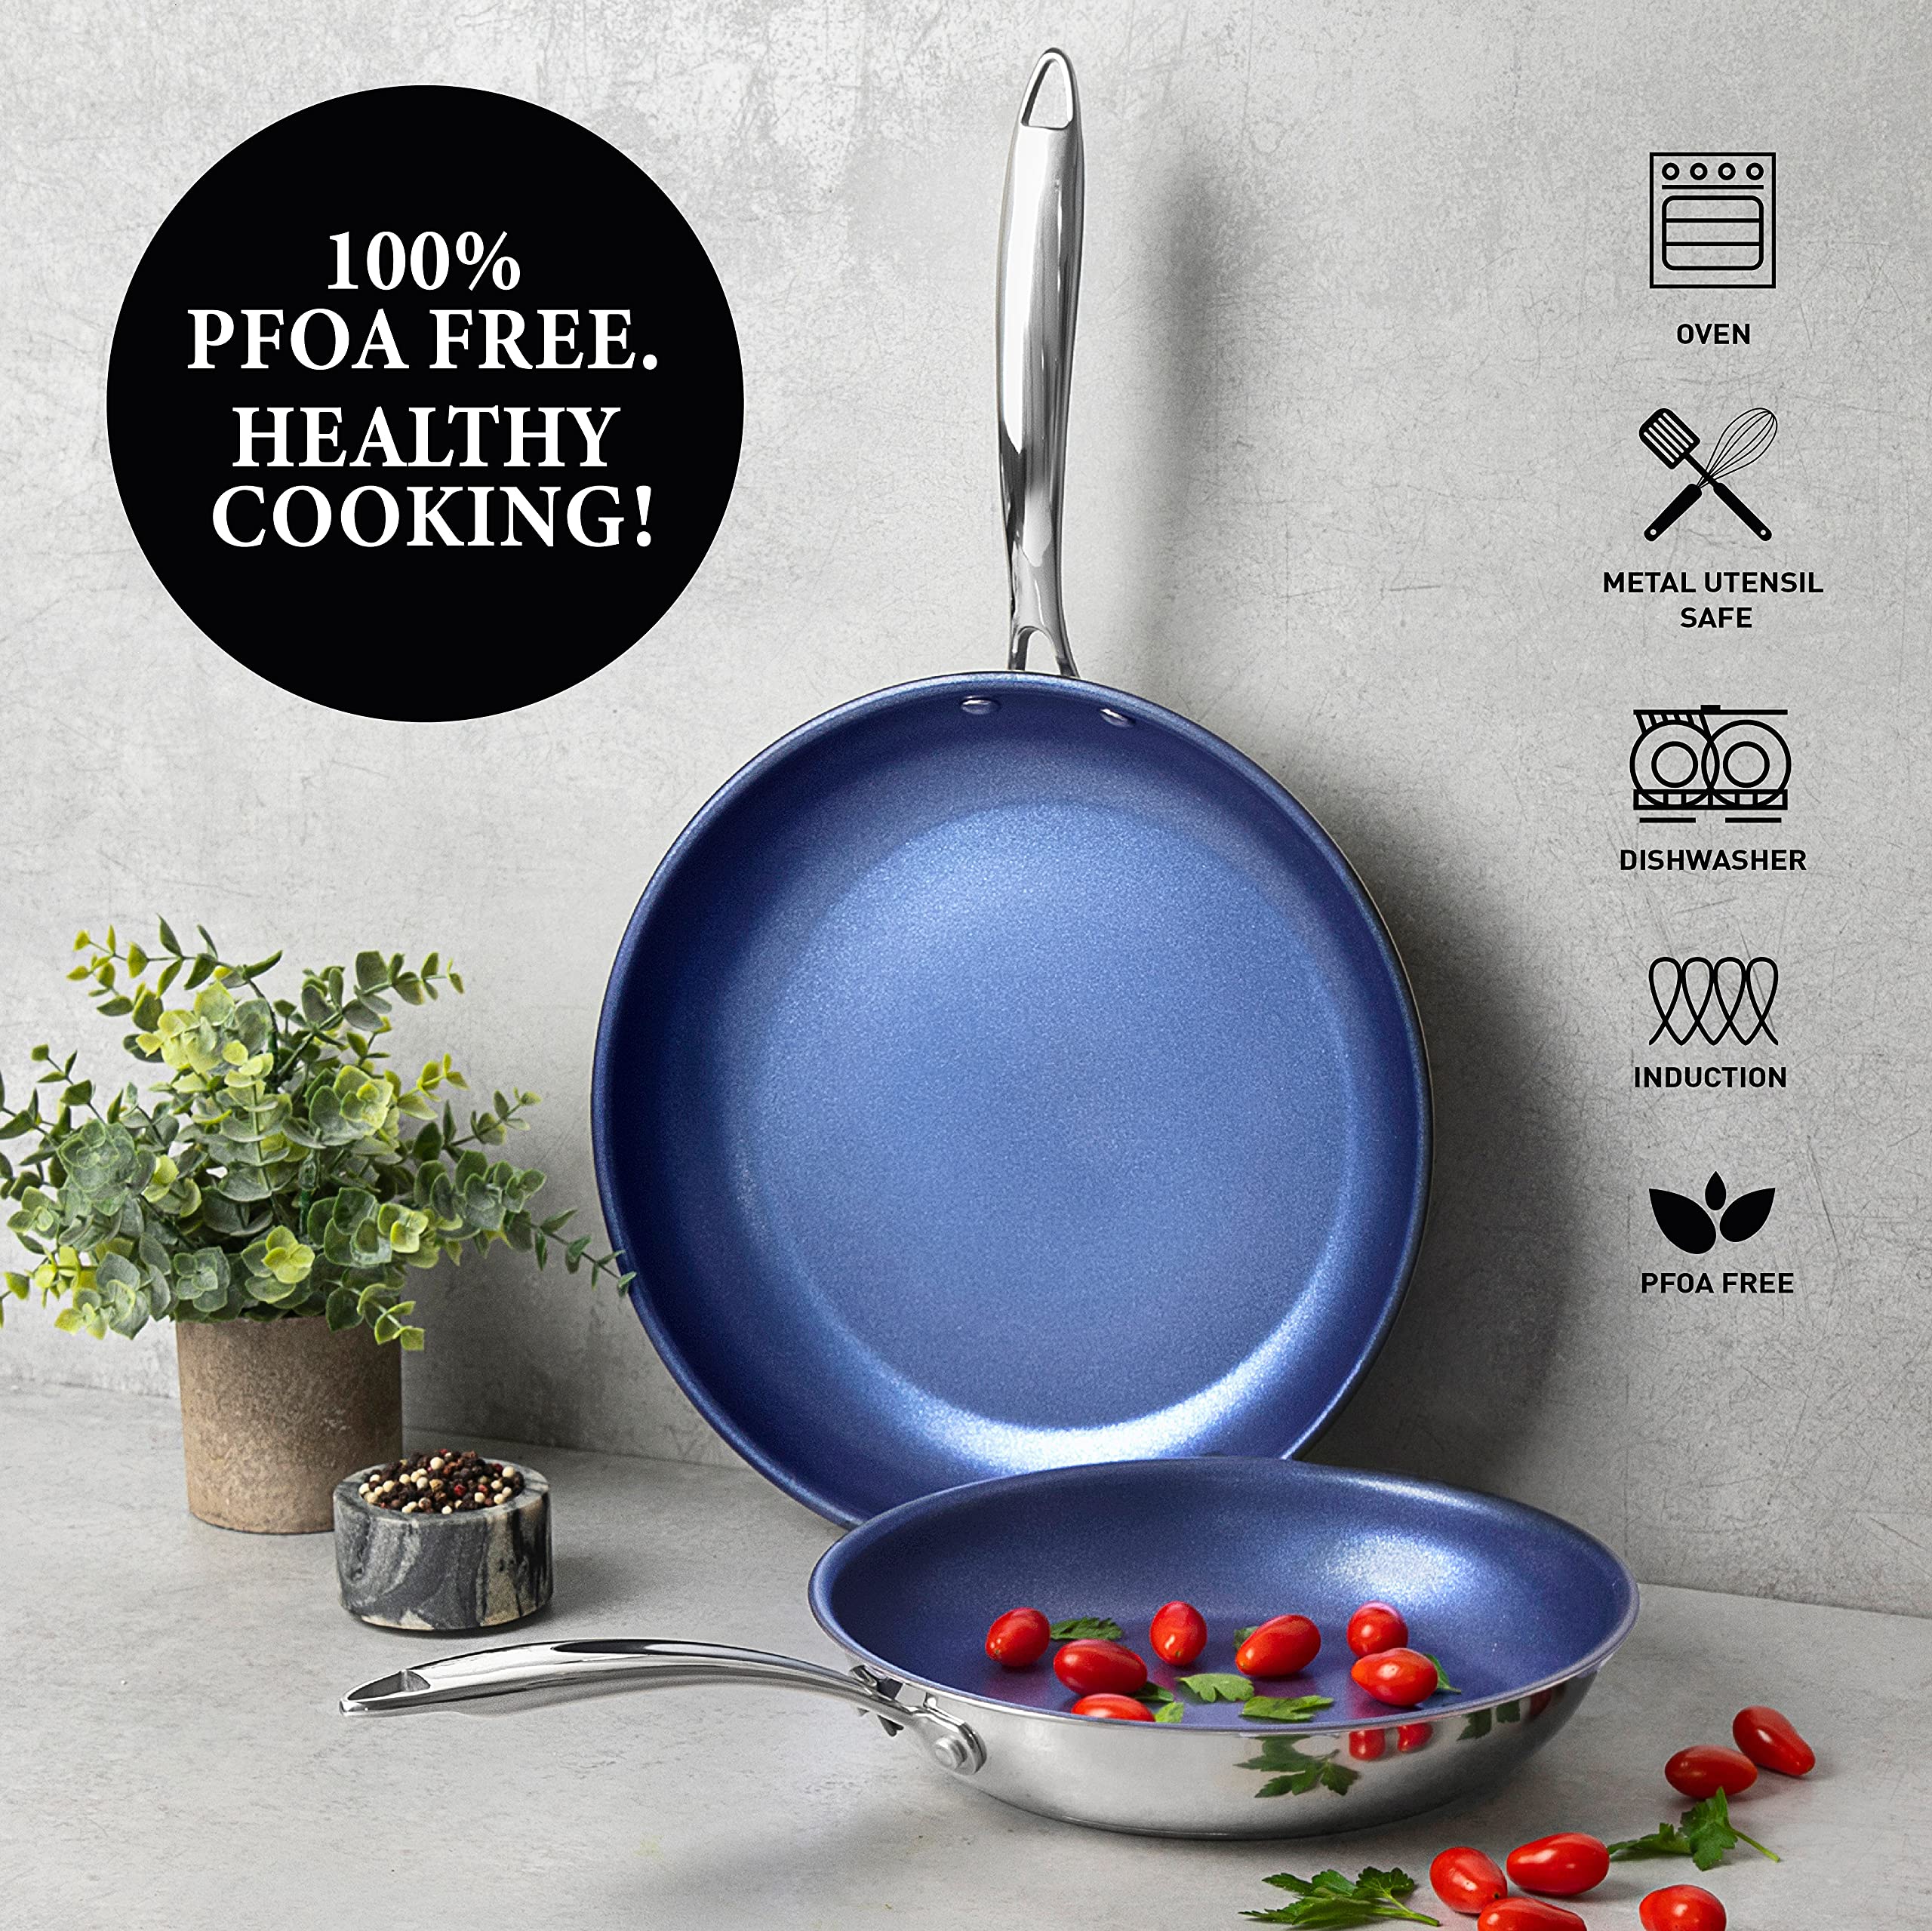 Granitestone Stainless Steel Nonstick Fry Pan Set, Tri-Ply Base, Stainless Steel 10” & 11” Skillets with Nonstick Mineral Coating, 100% PFOA Free, Cool Touch Handles, Induction, Oven & Dishwasher Safe